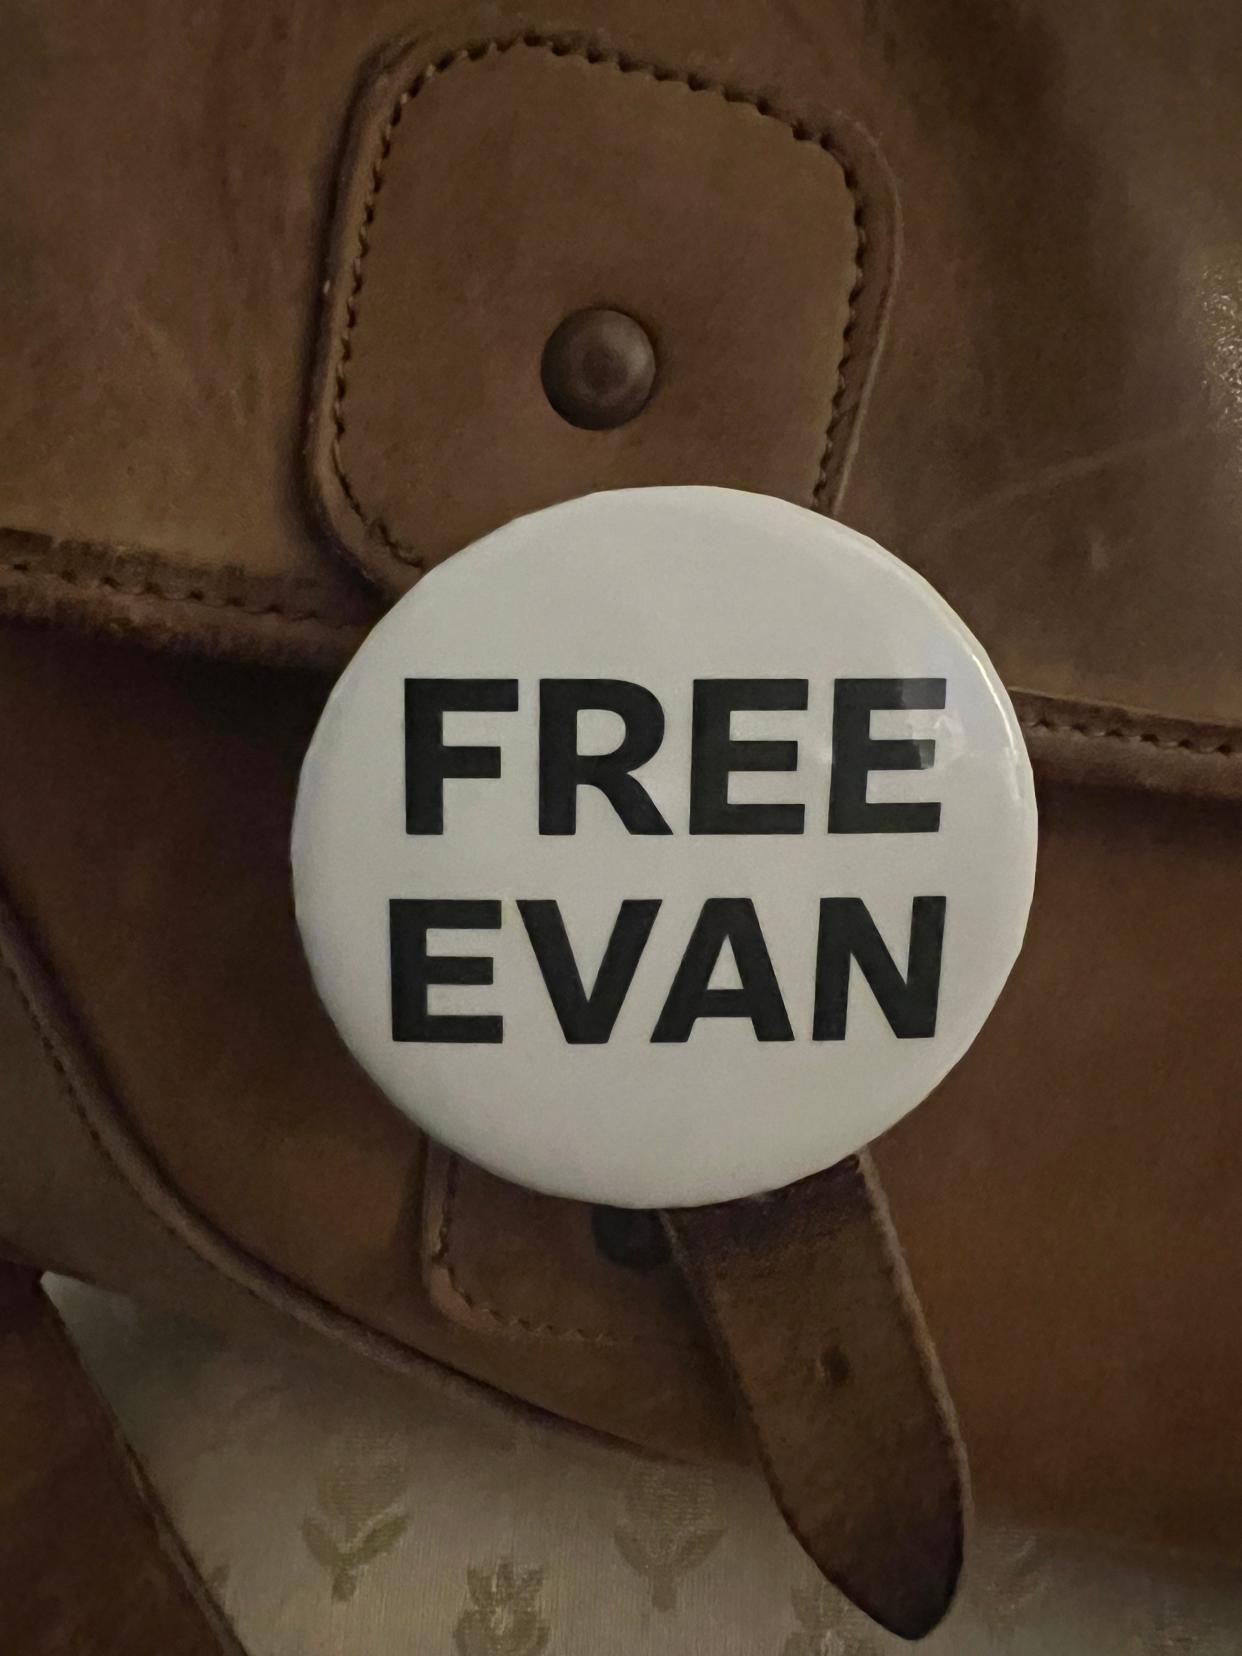 I've carried this "Free Evan" button on my old leather briefcase for nearly a year. Evan Gershkovich, the Moscow Bureau Chief for The Wall Street Journal, was detained March 29, 2023 by Russian authorities. He must be released.